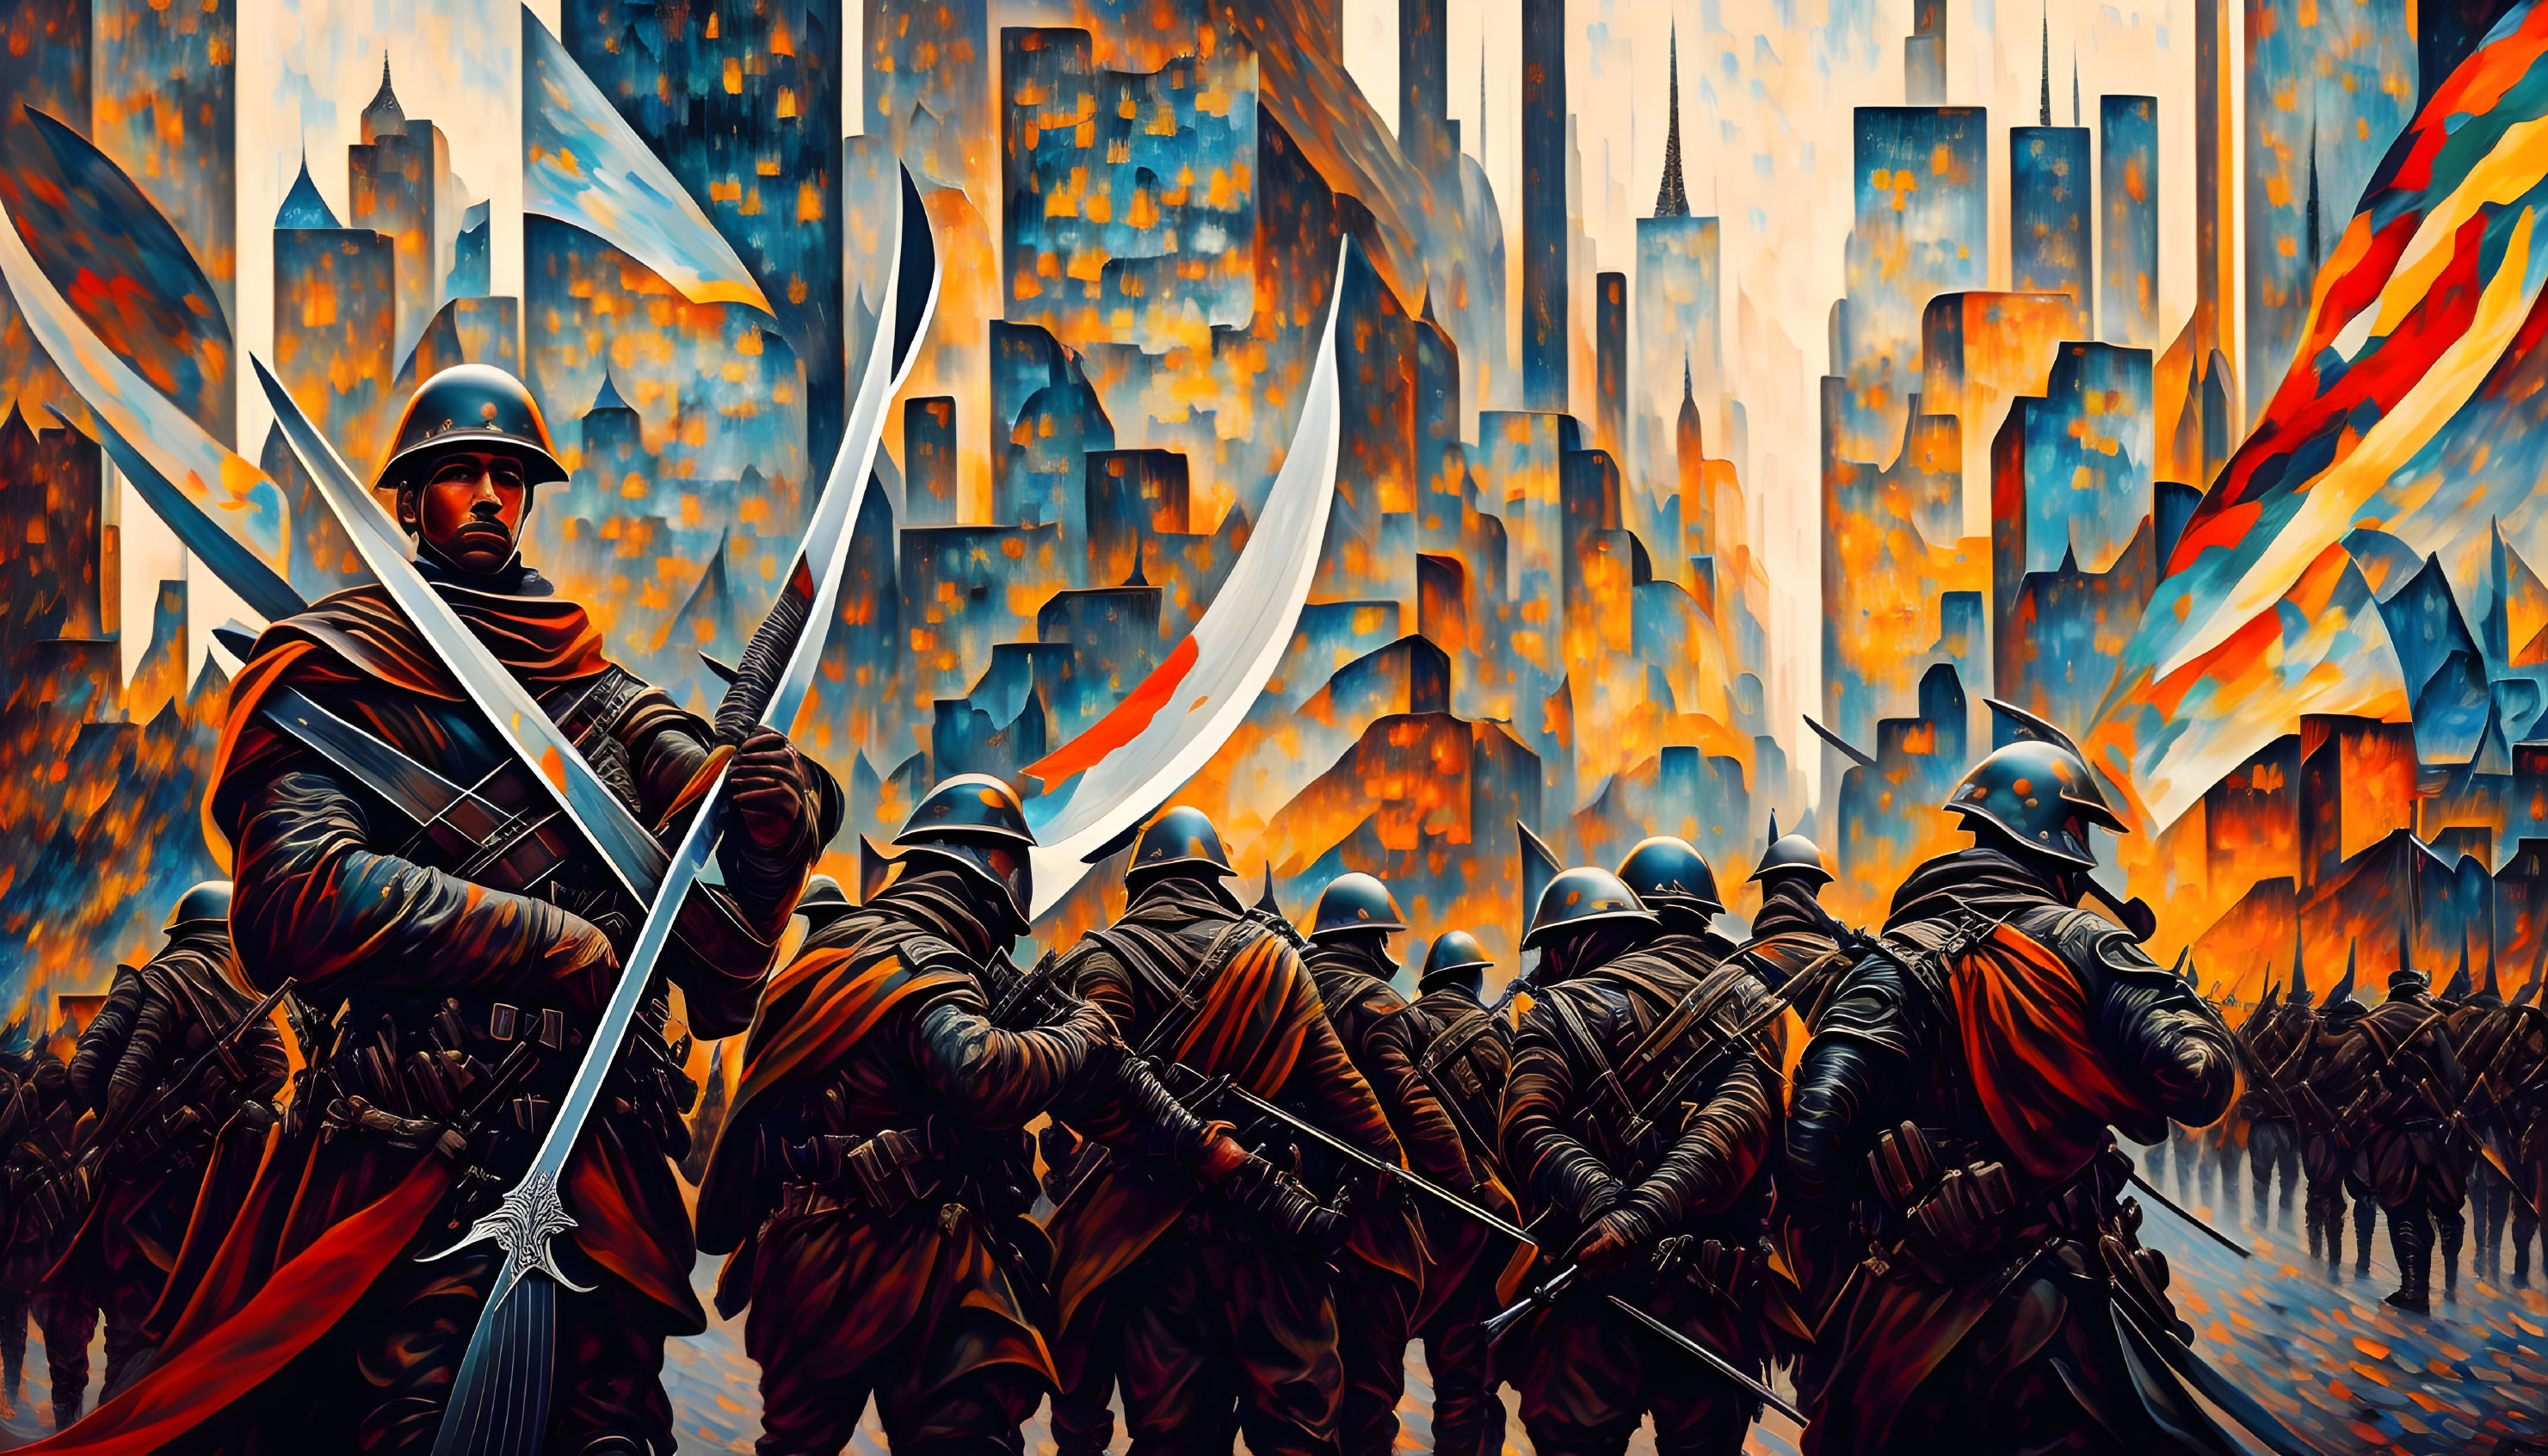 Futuristic soldiers in armor with large scythes in stylized cityscape under orange sky